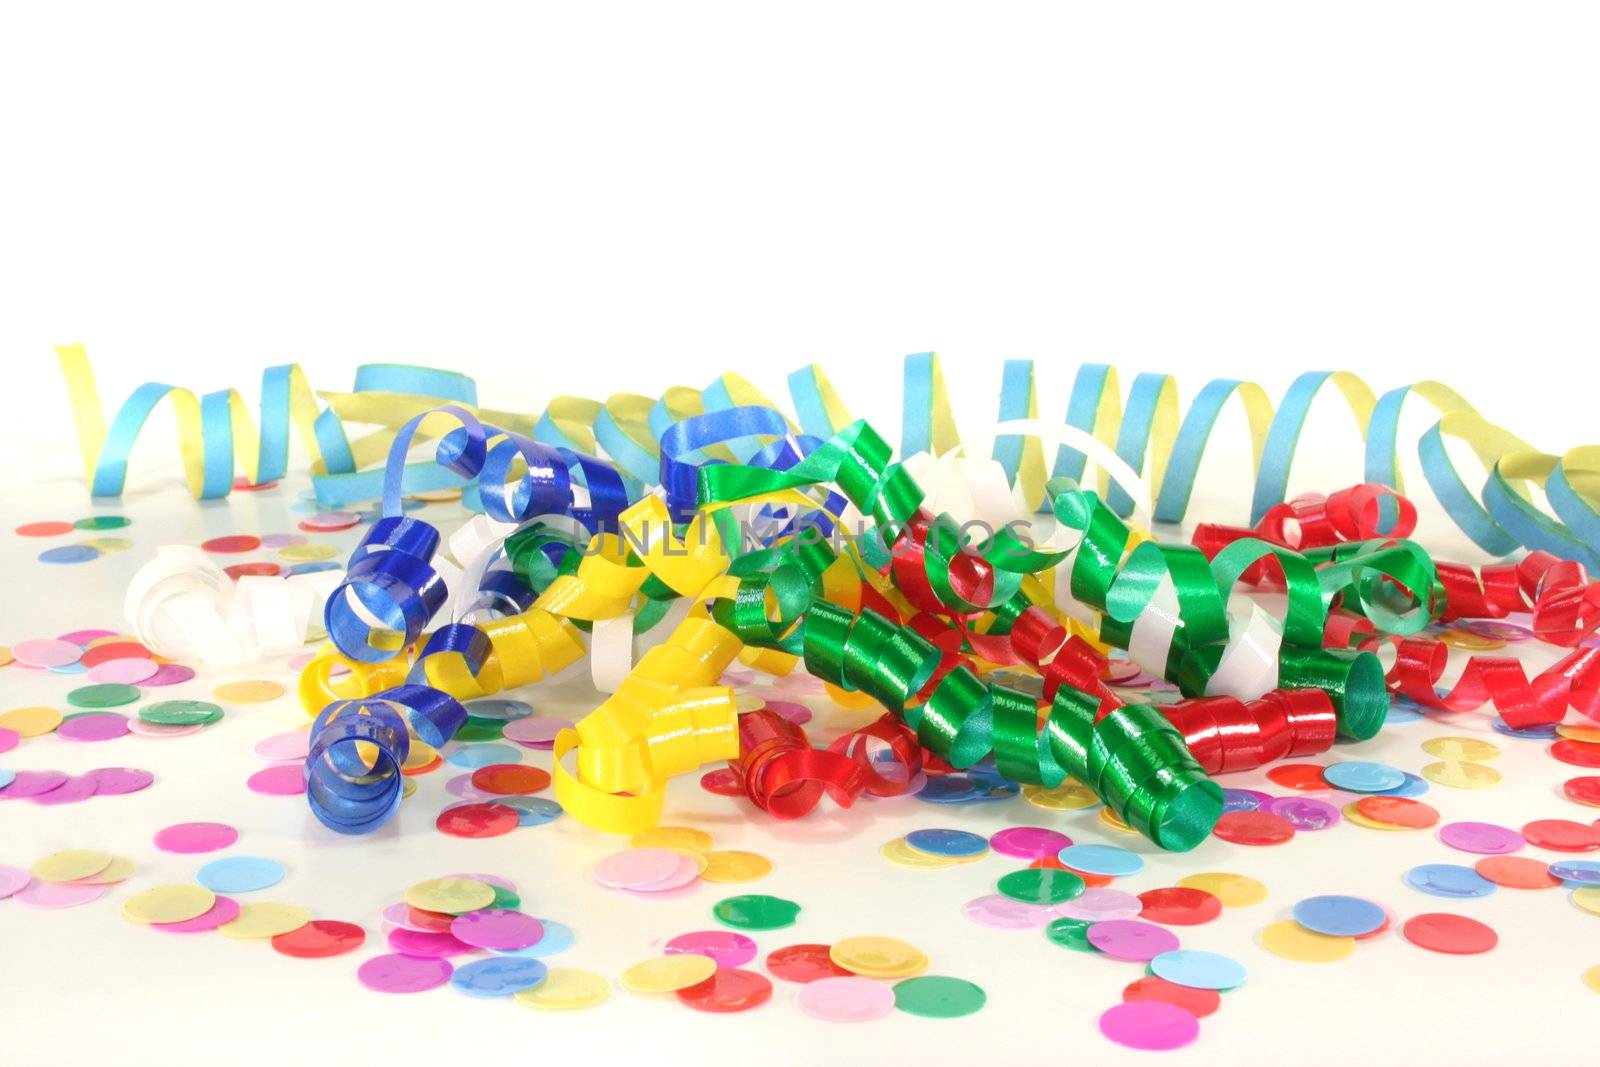 Colorful confetti and streamers on a white background